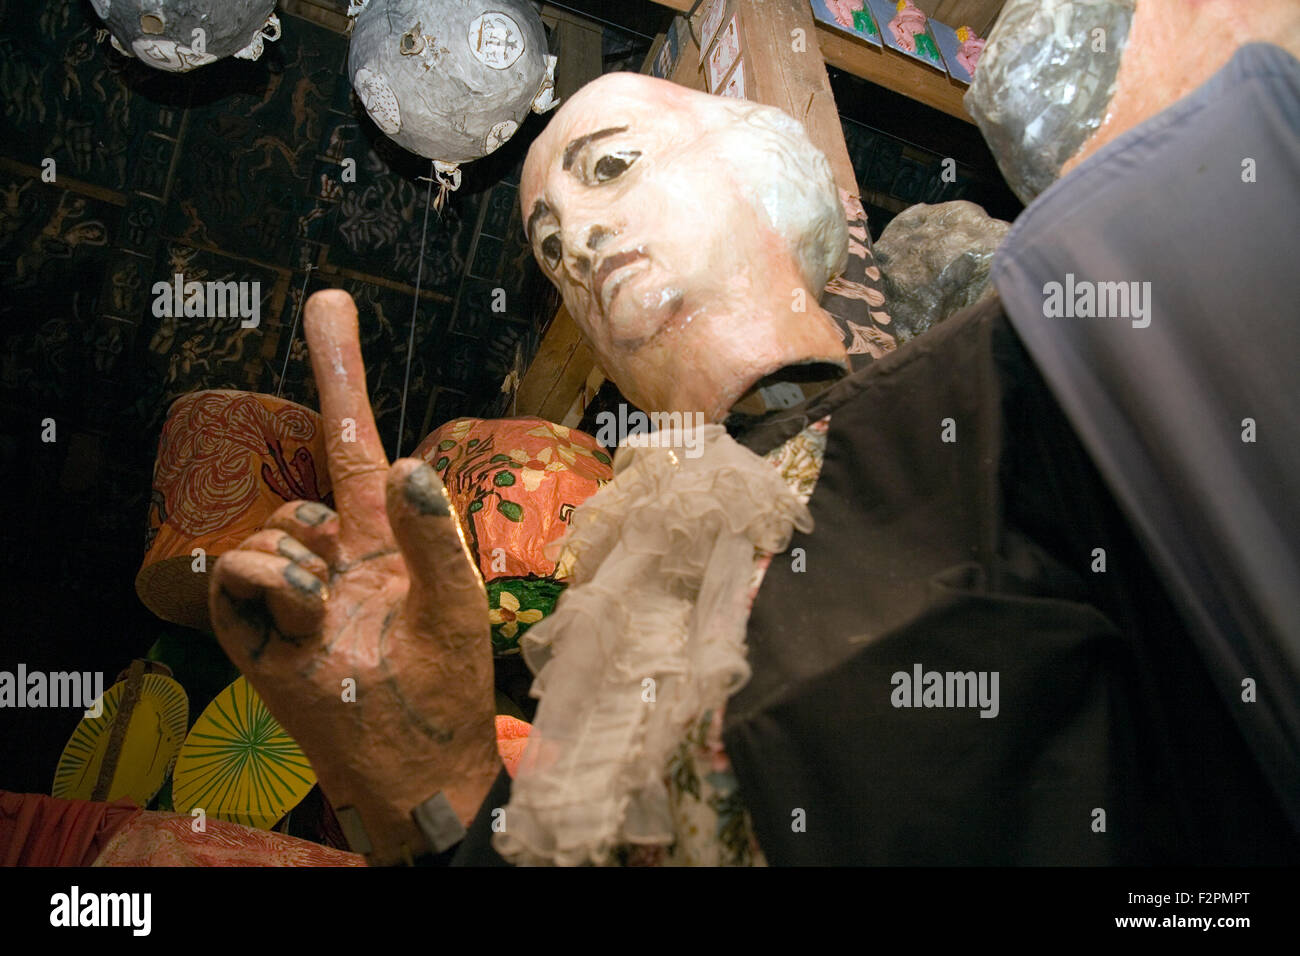 A puppet at the Bread and Puppet Museum, near Glover, Vermont, USA Stock Photo